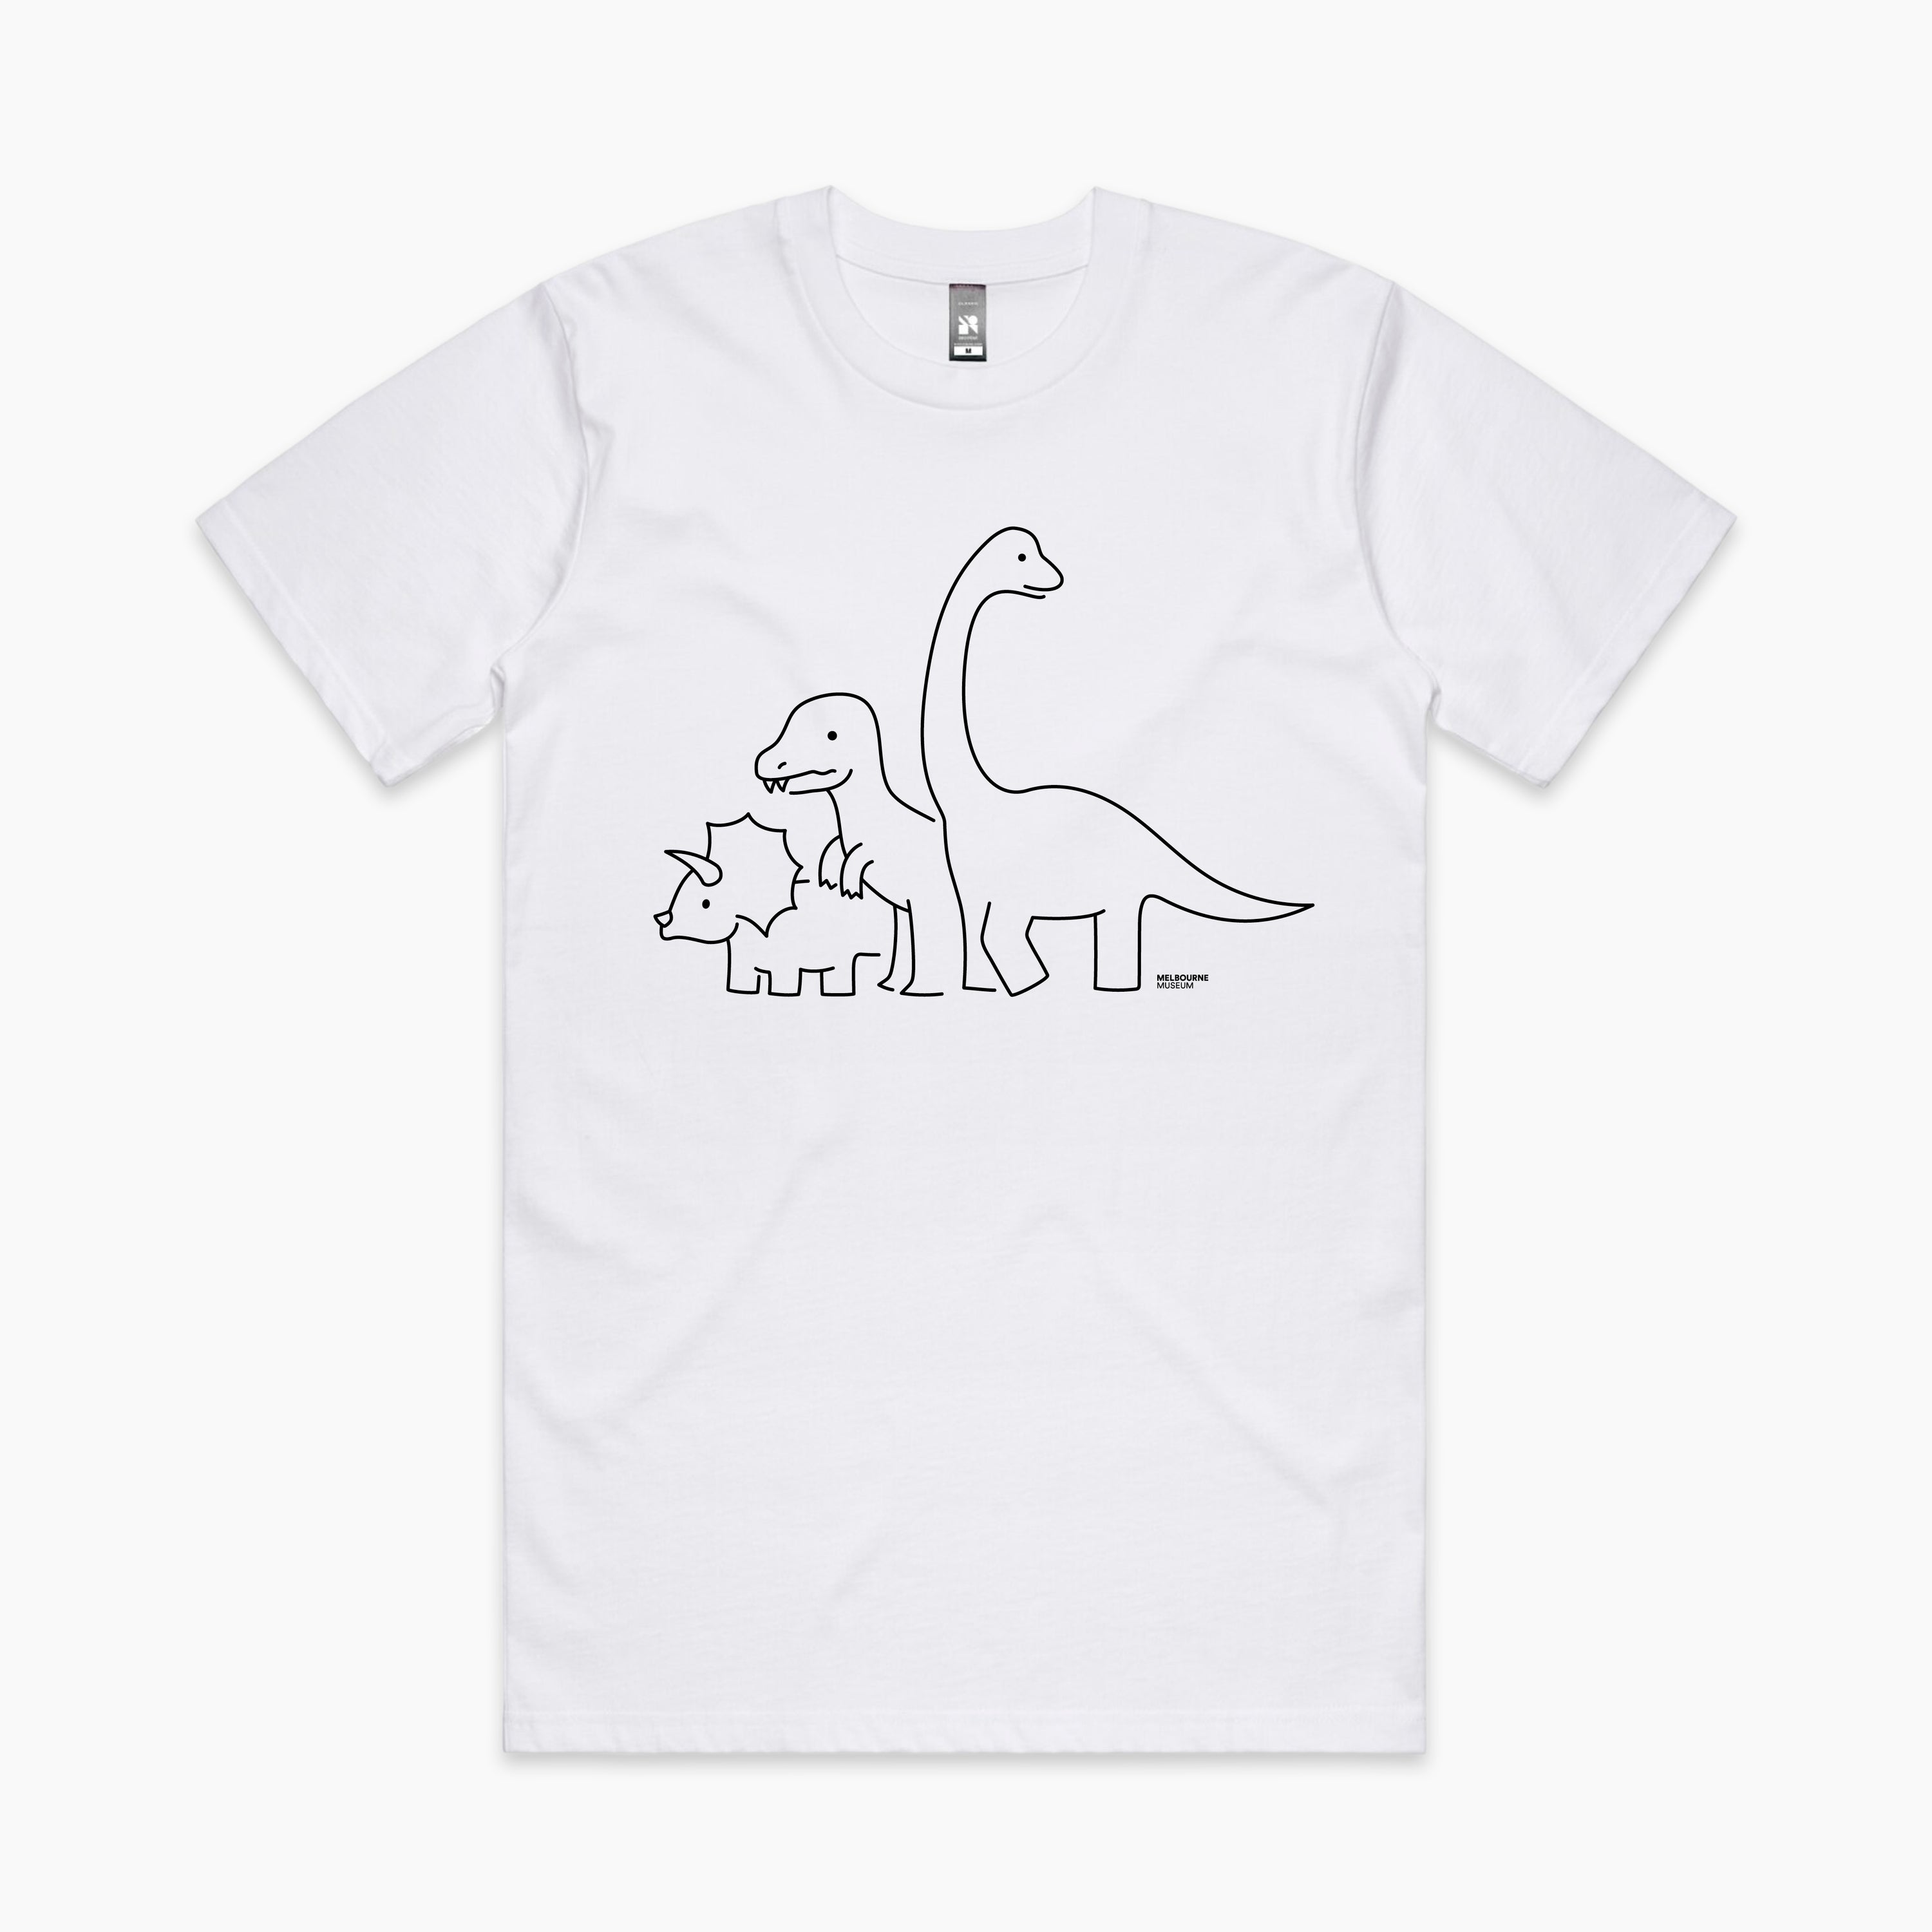 Melbourne Museum Dino Gang Adults Tee